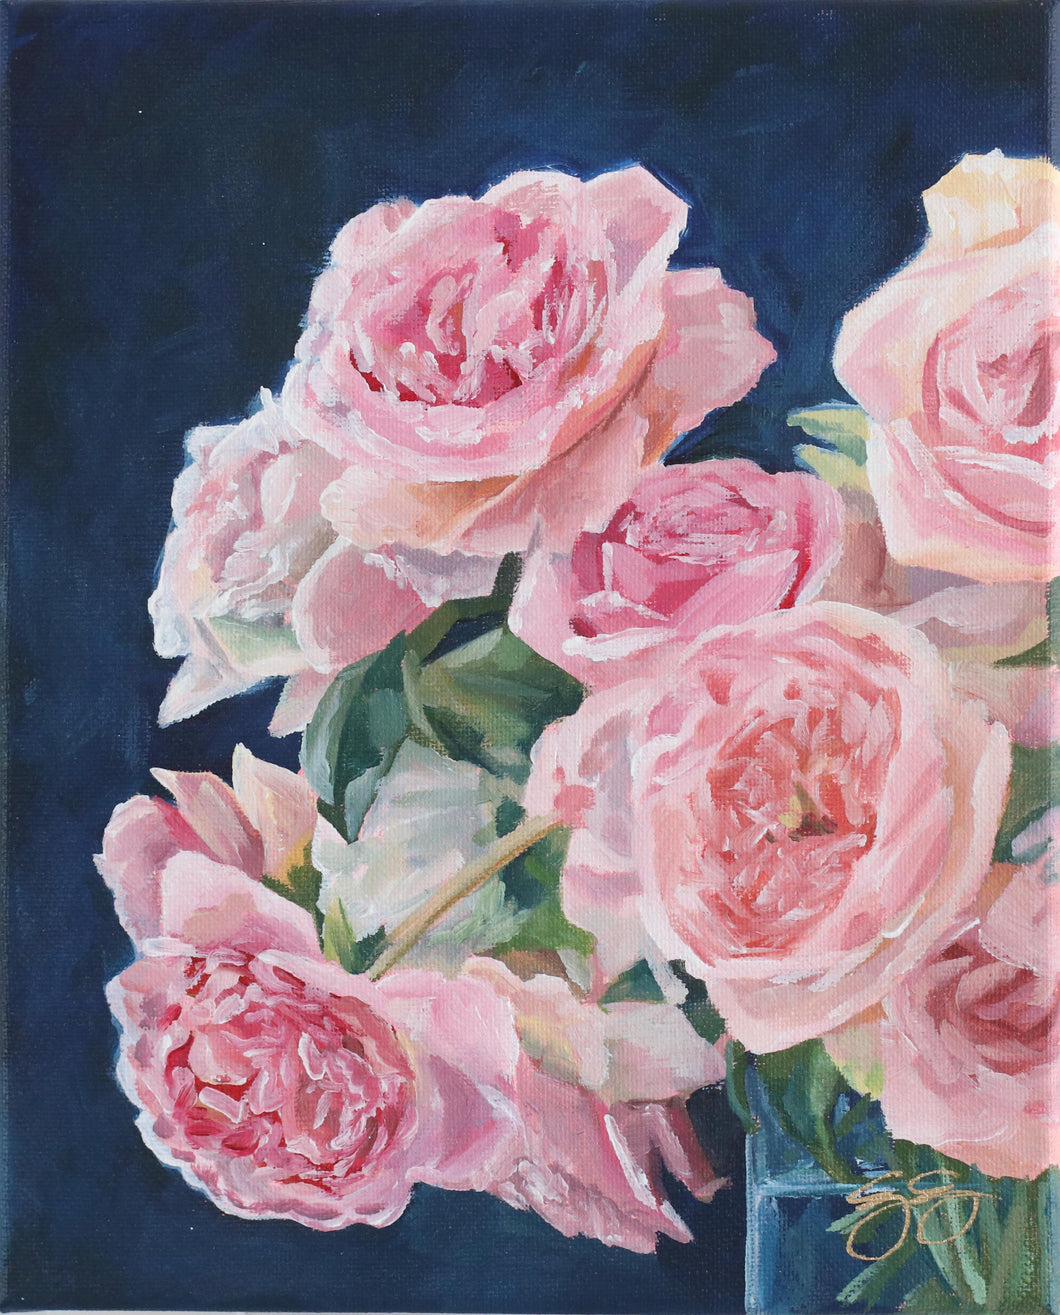 Pink Roses on Navy Blue - 8 x 10